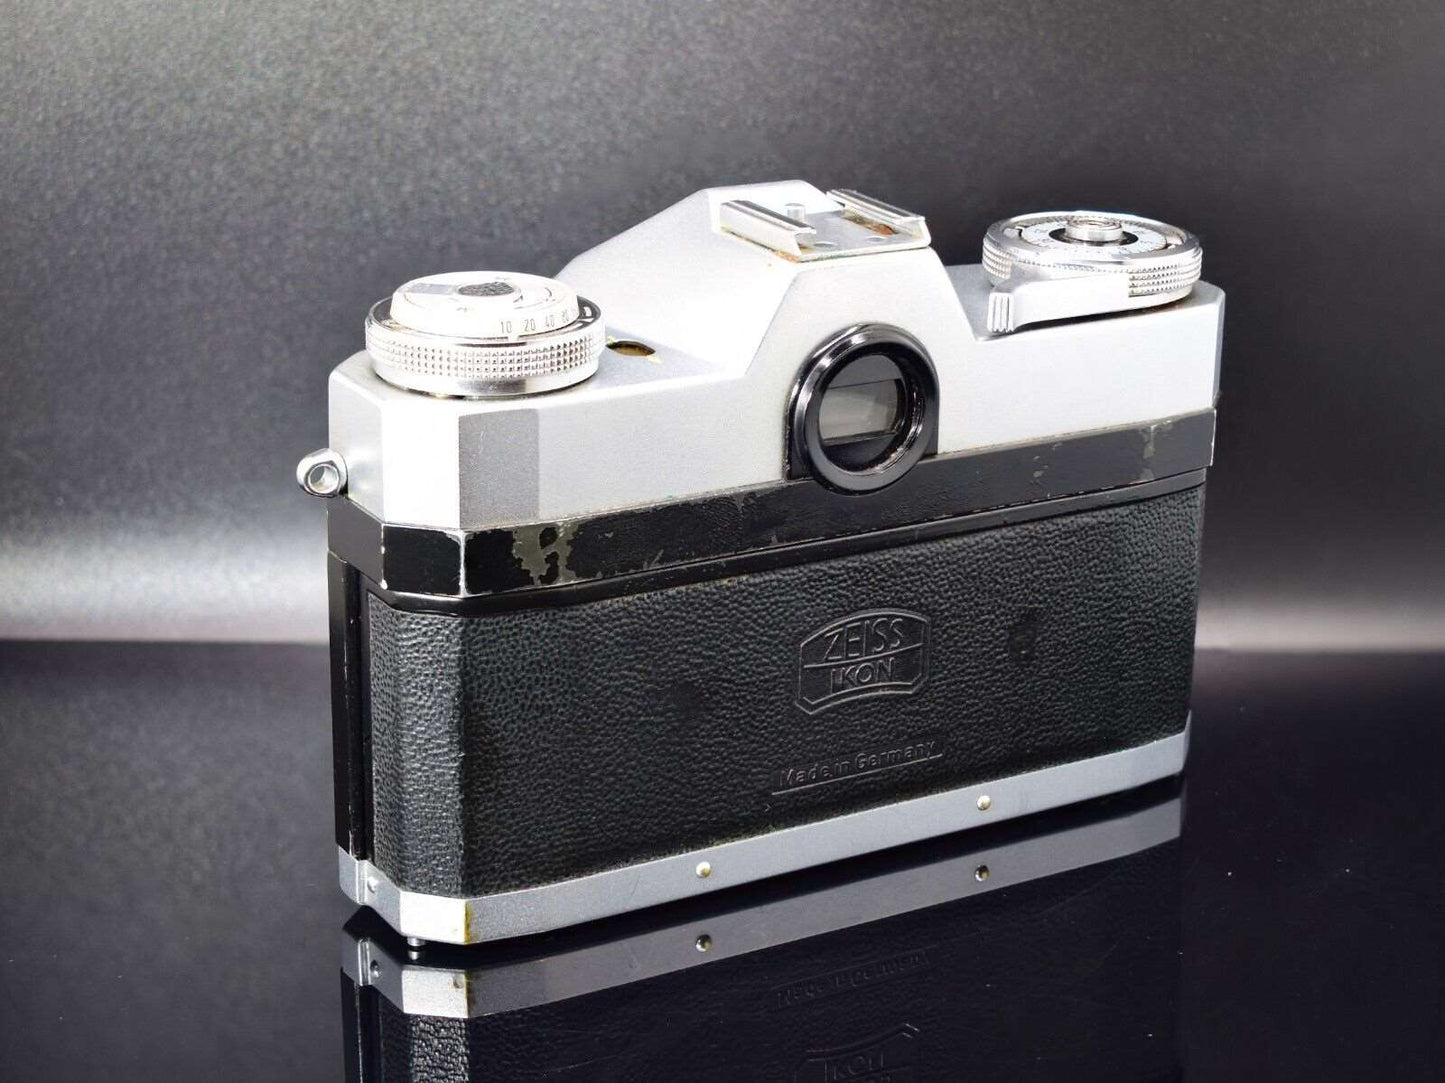 Zeiss Ikon Contaflex Super 35mm Camera with Synchro Compur Shutter and Carl Zeiss Lens